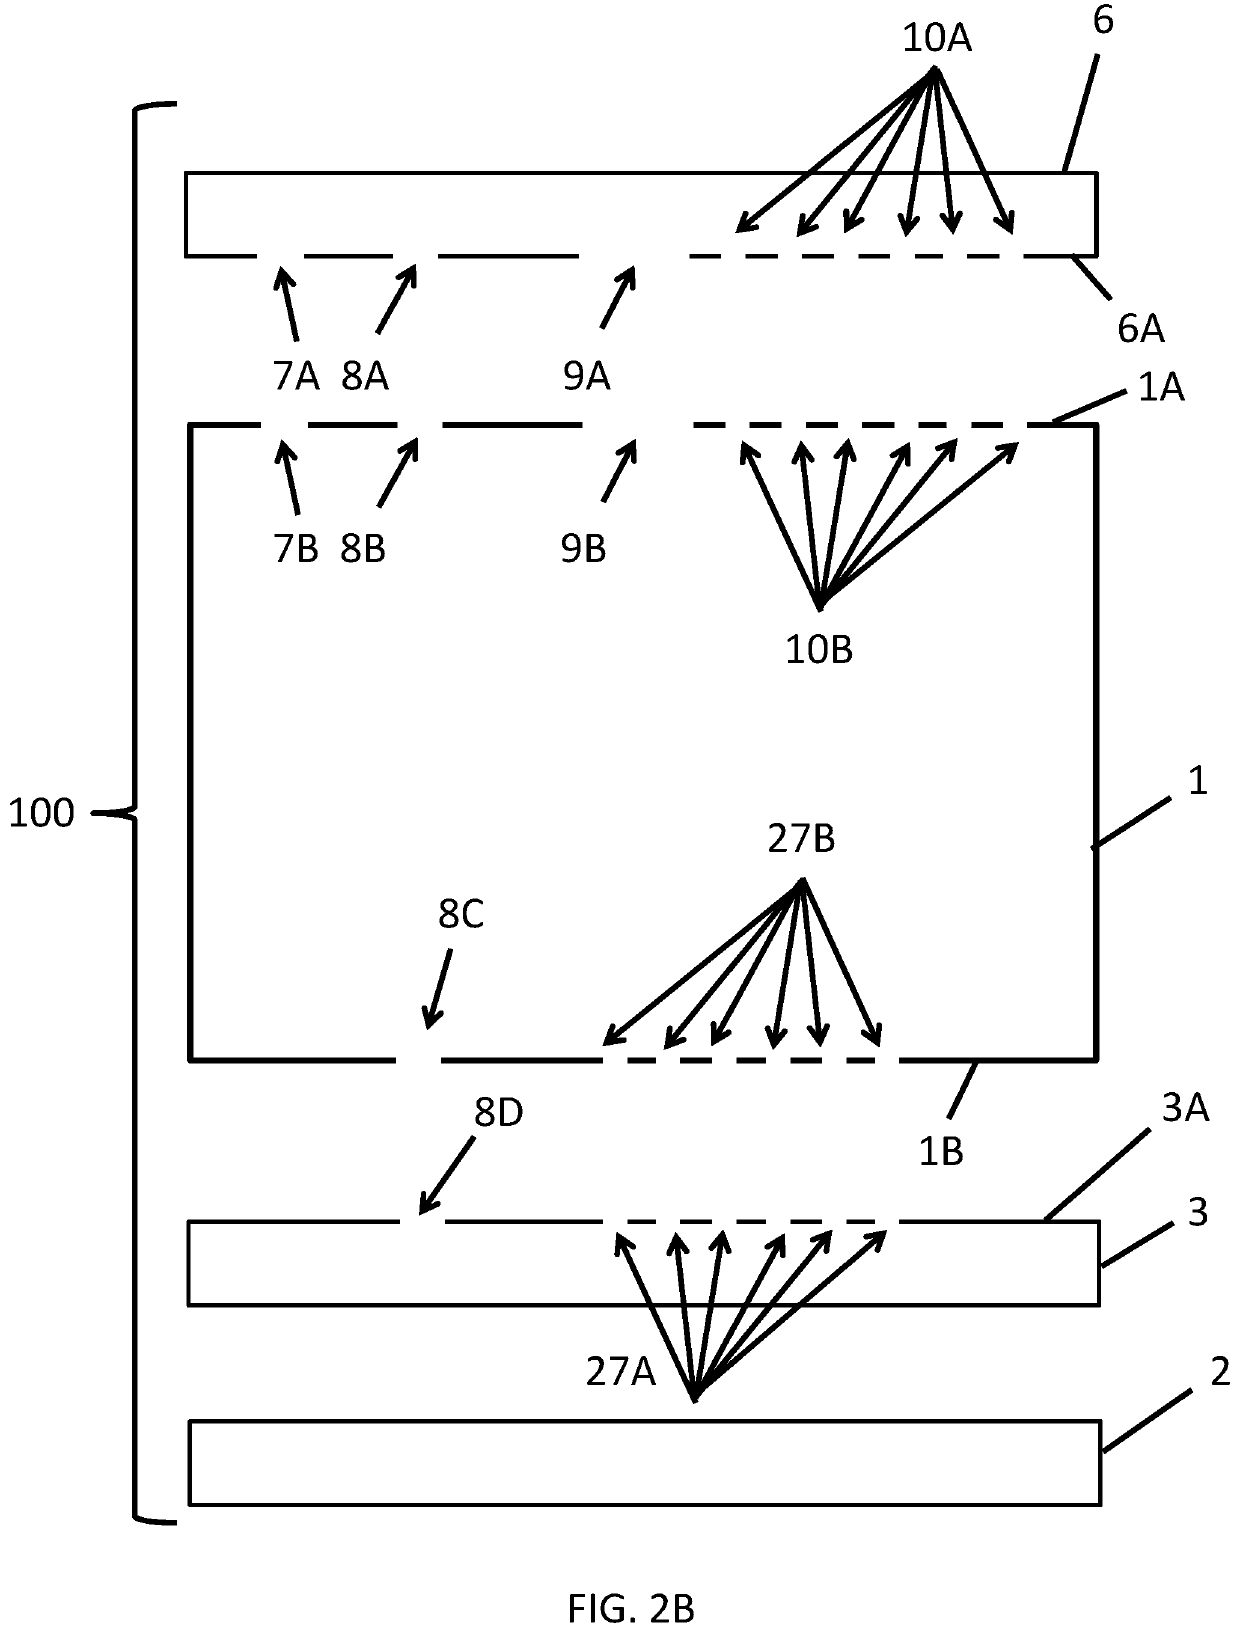 Table top hydro-mechanical candelabra display device